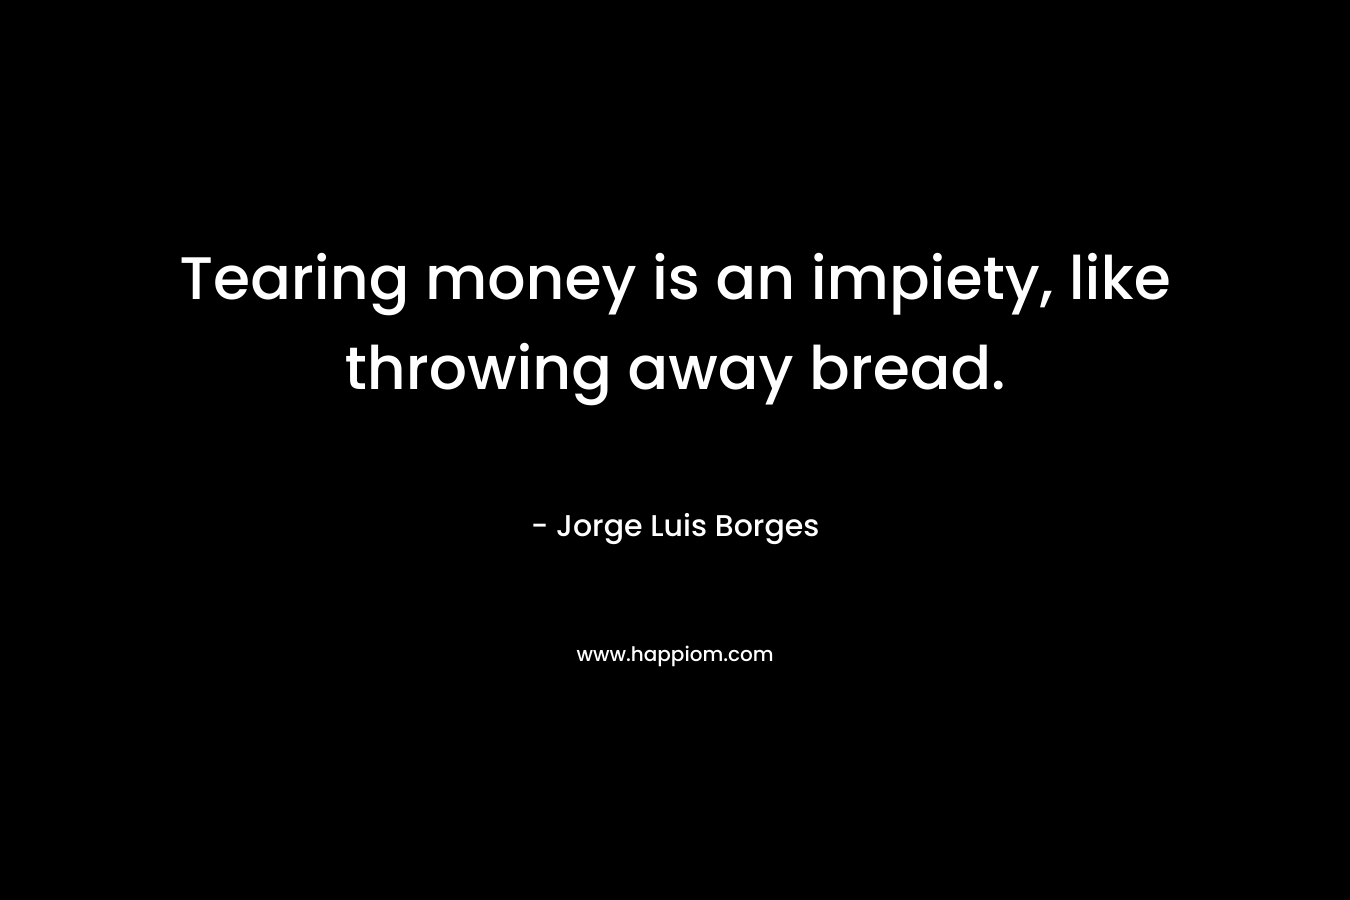 Tearing money is an impiety, like throwing away bread. – Jorge Luis Borges